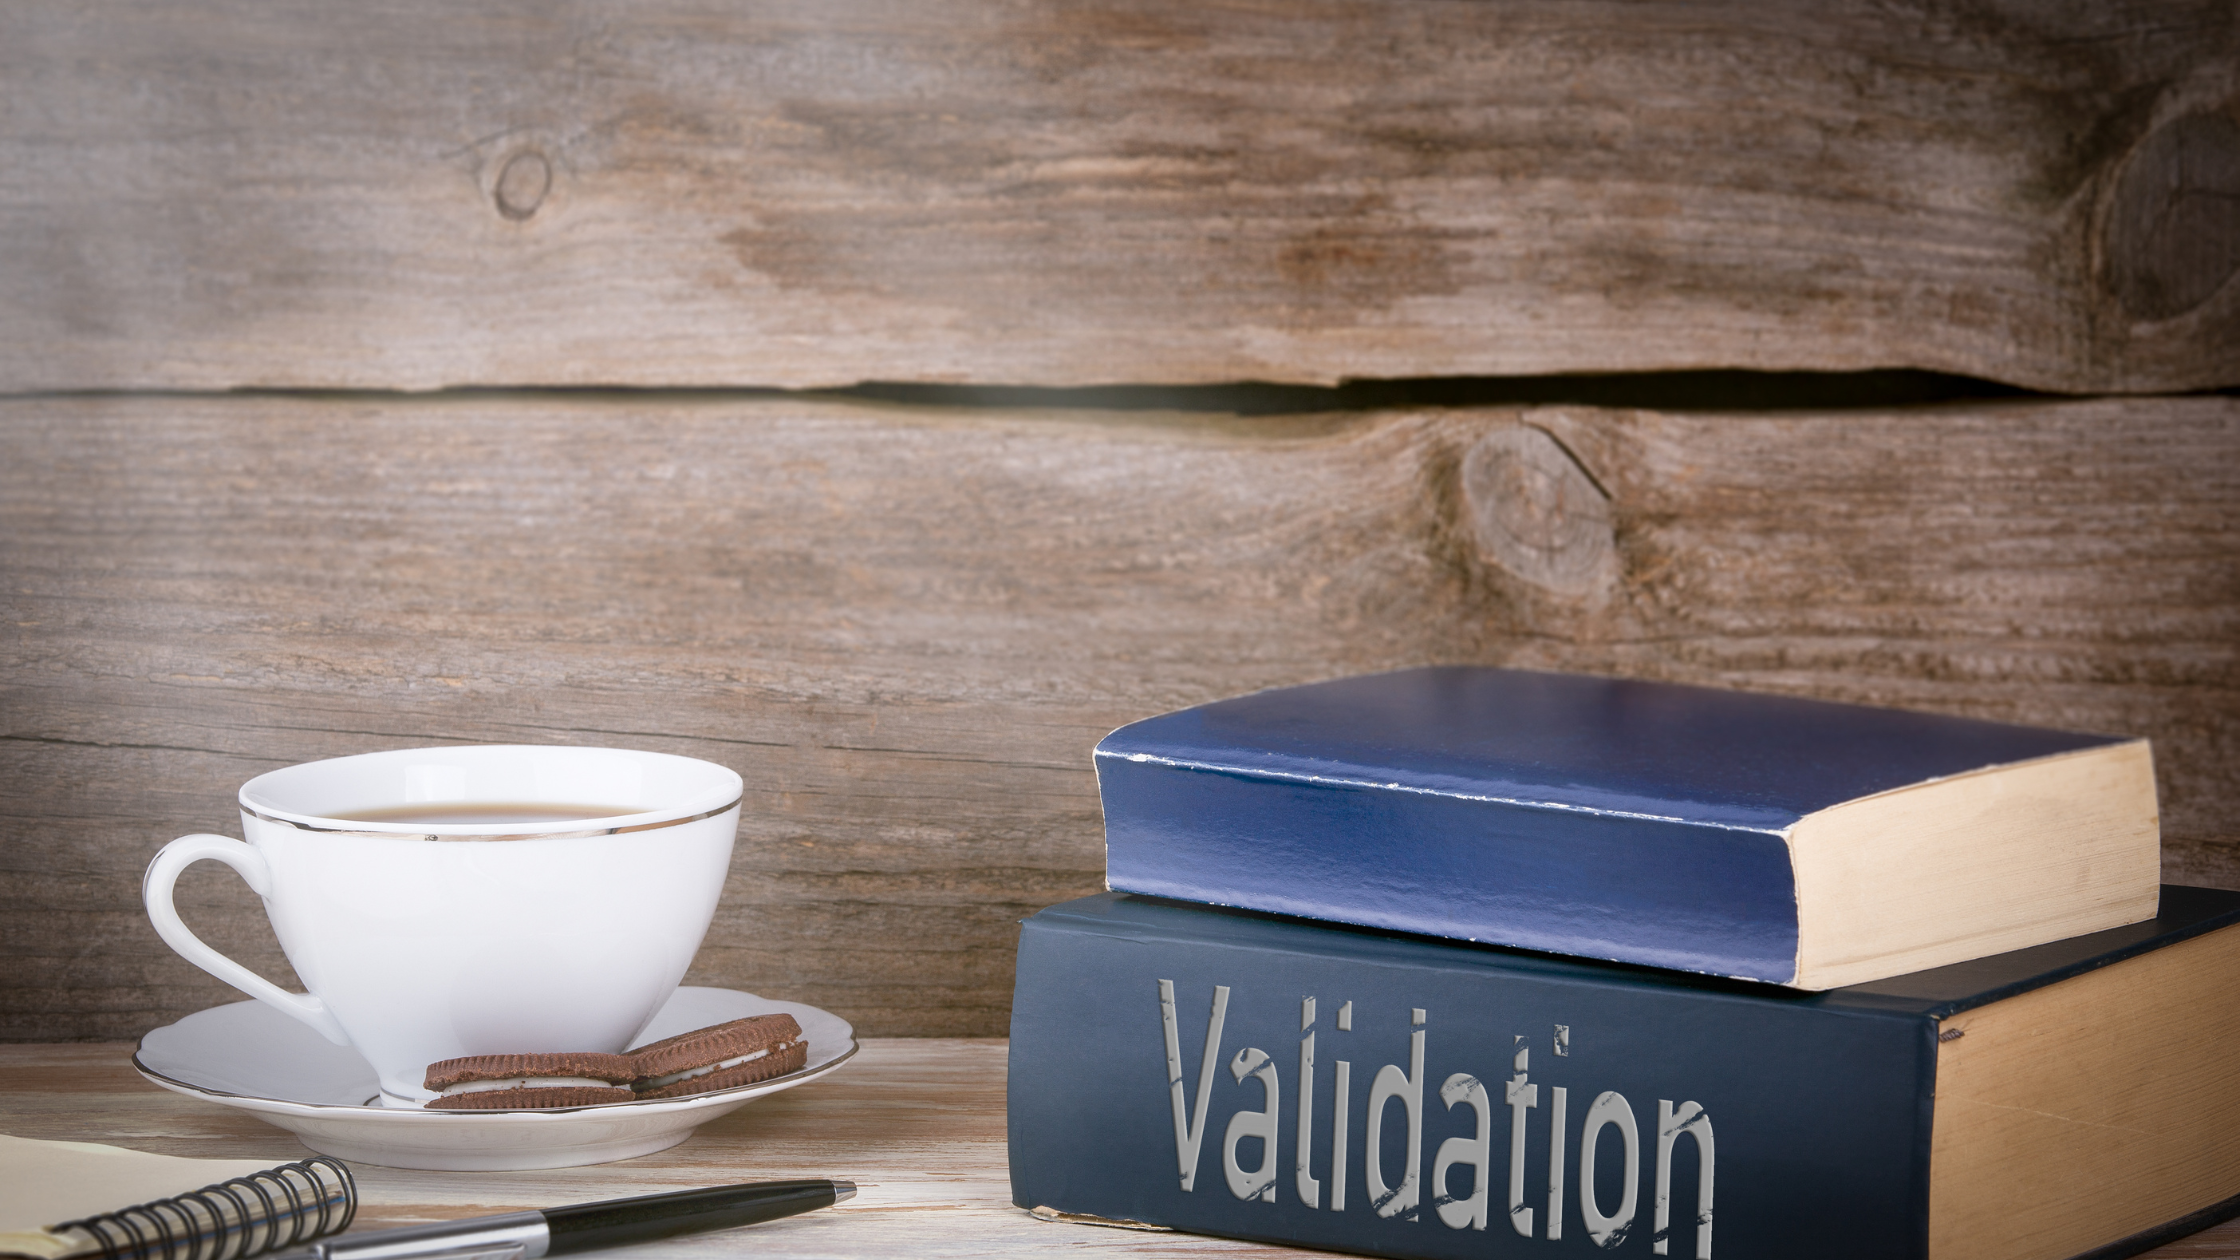 What is Service validation and testing in ITIL?